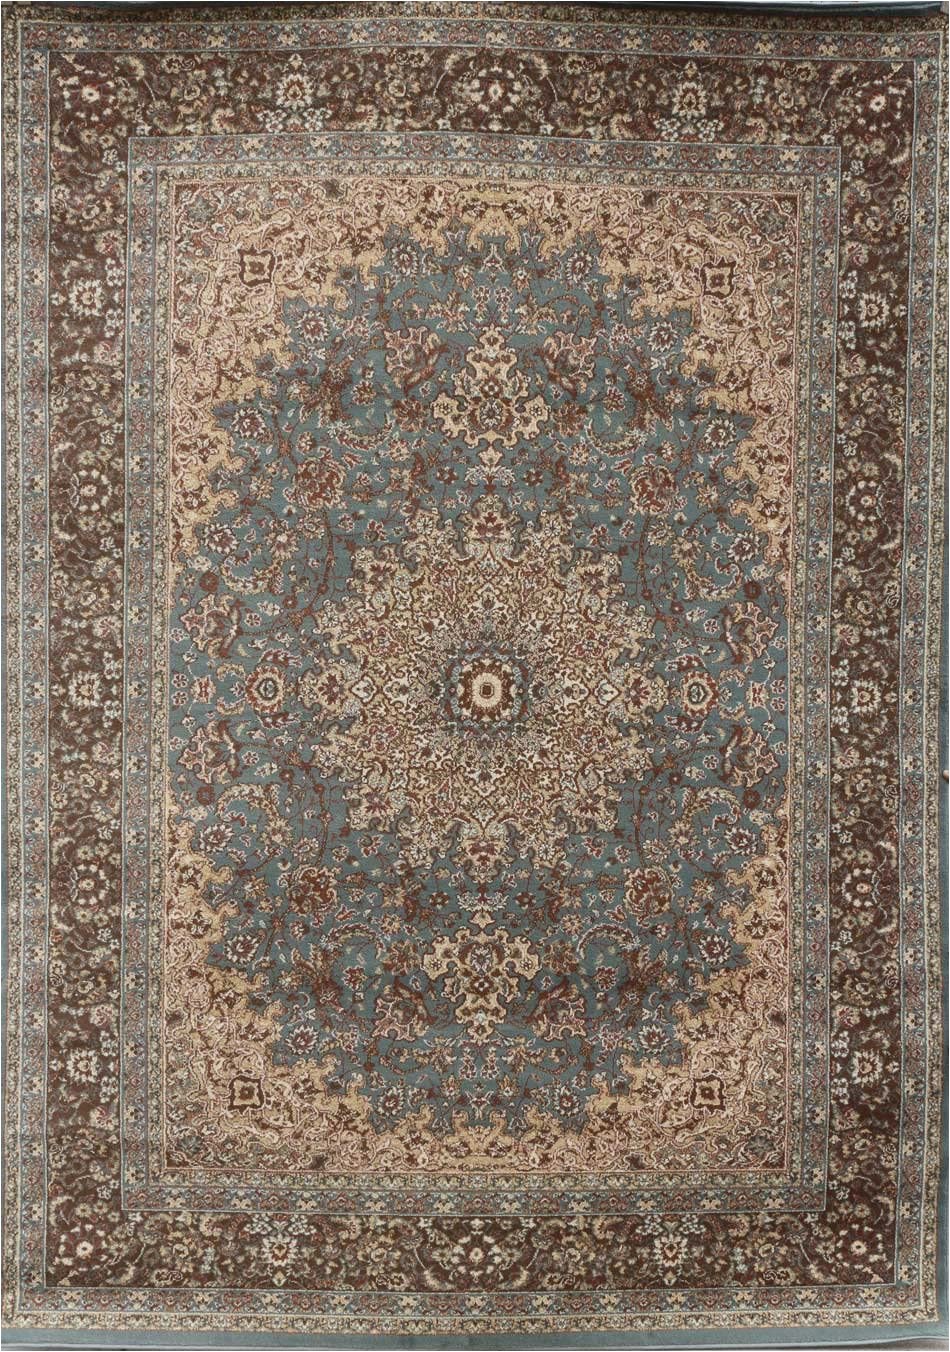 Light Blue and Brown area Rugs Feraghan New City Traditional isfahan Wool Persian area Rug 2 X 3 Light Blue Silver